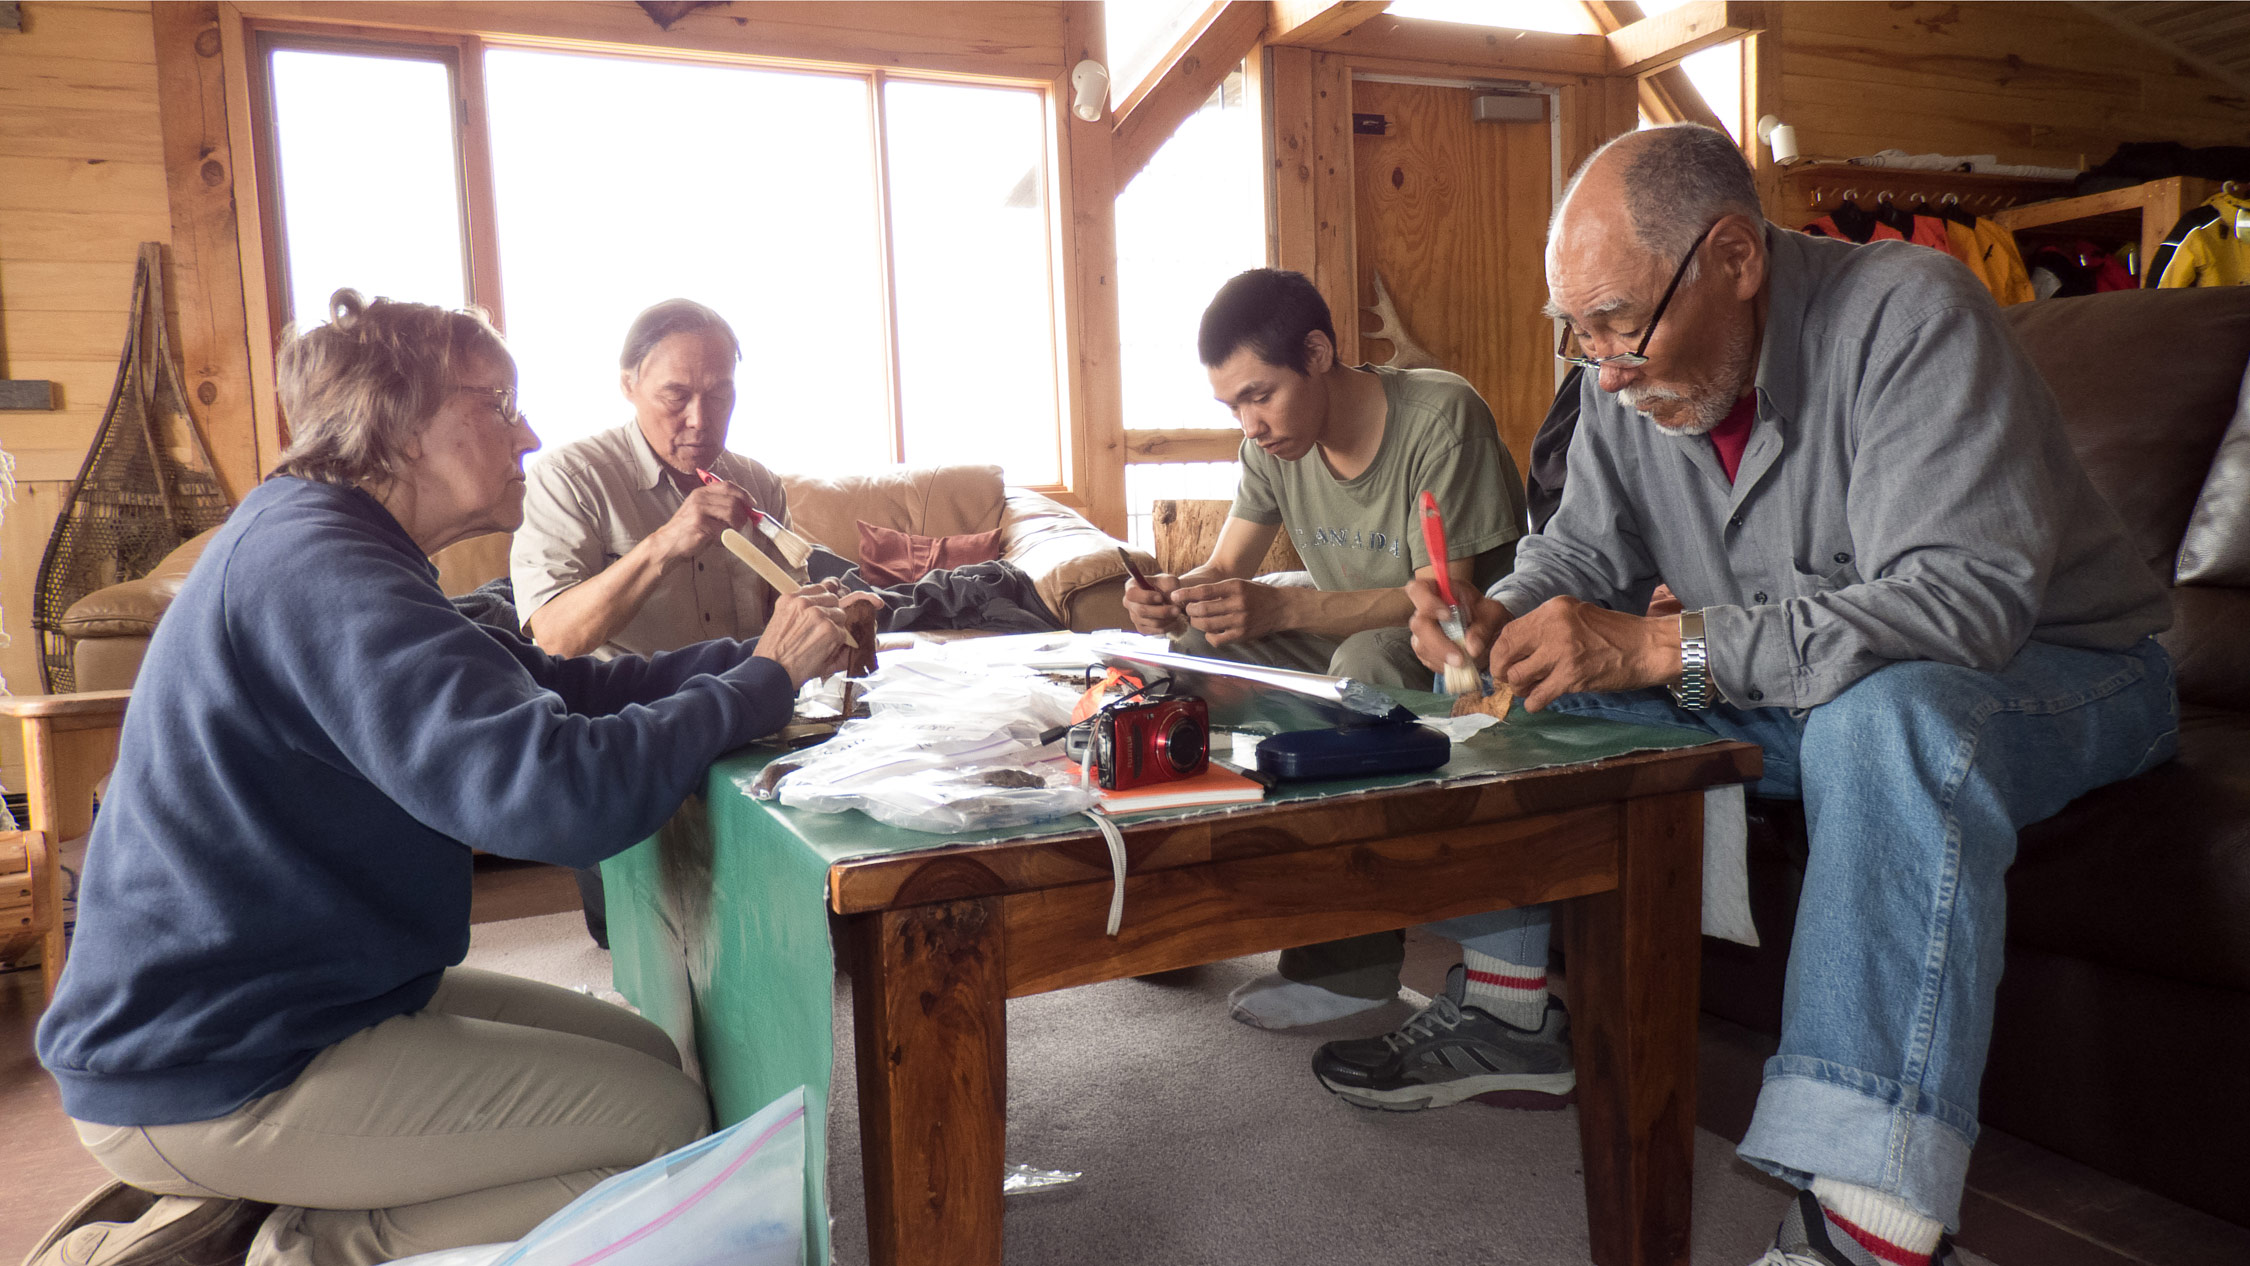 Preparing artifacts for carbon dating and other analyses at the lodge, from left: Virginia Petch, Luke Suluk, David Tassiuk, and Peter Alareak.